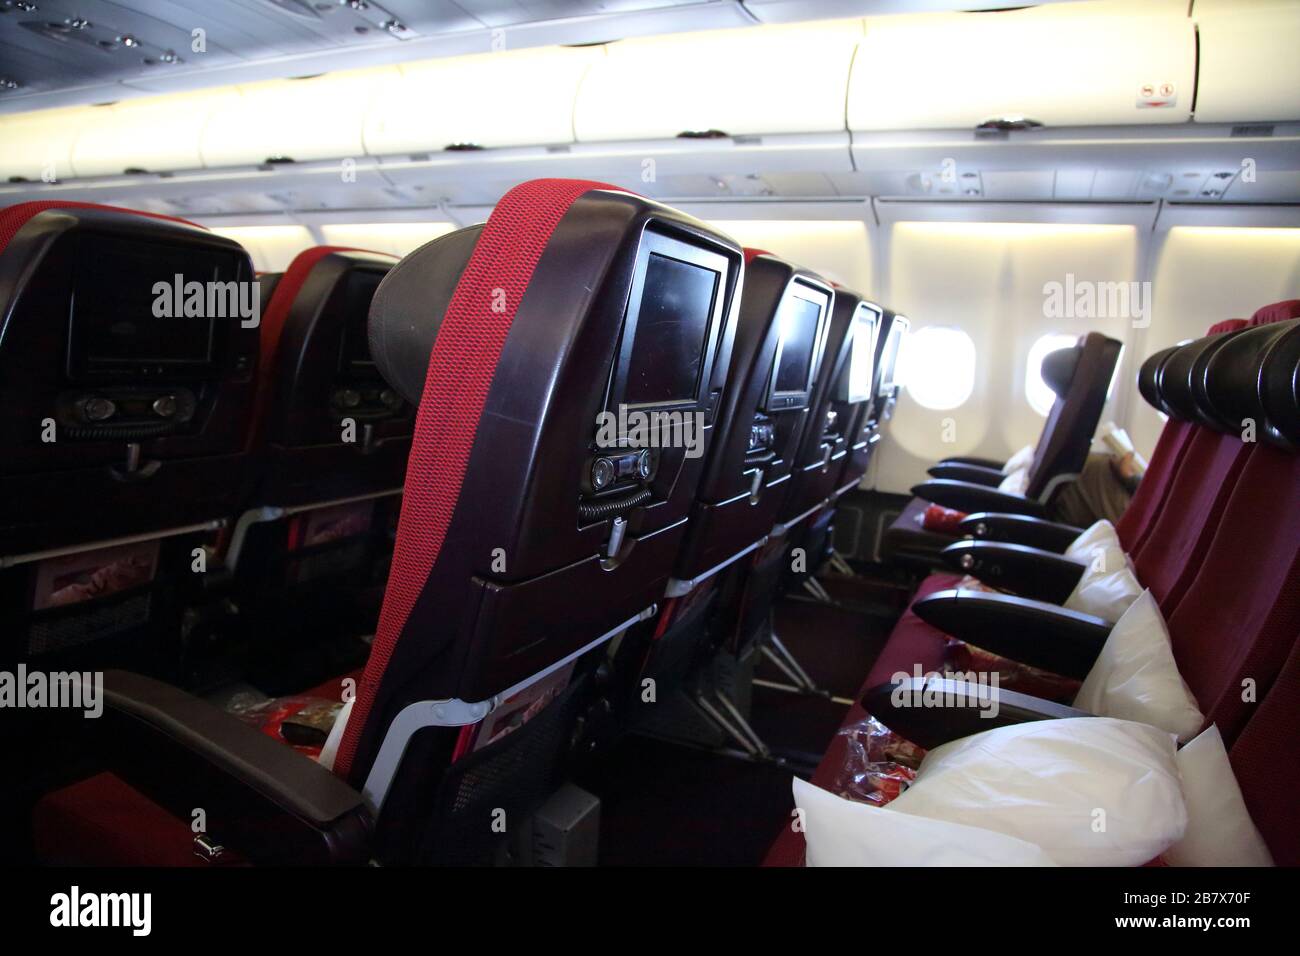 Interior of Aeroplane Boeing 747-400 (744) Showing Television Sets in the Head Rest of the Seats Stock Photo